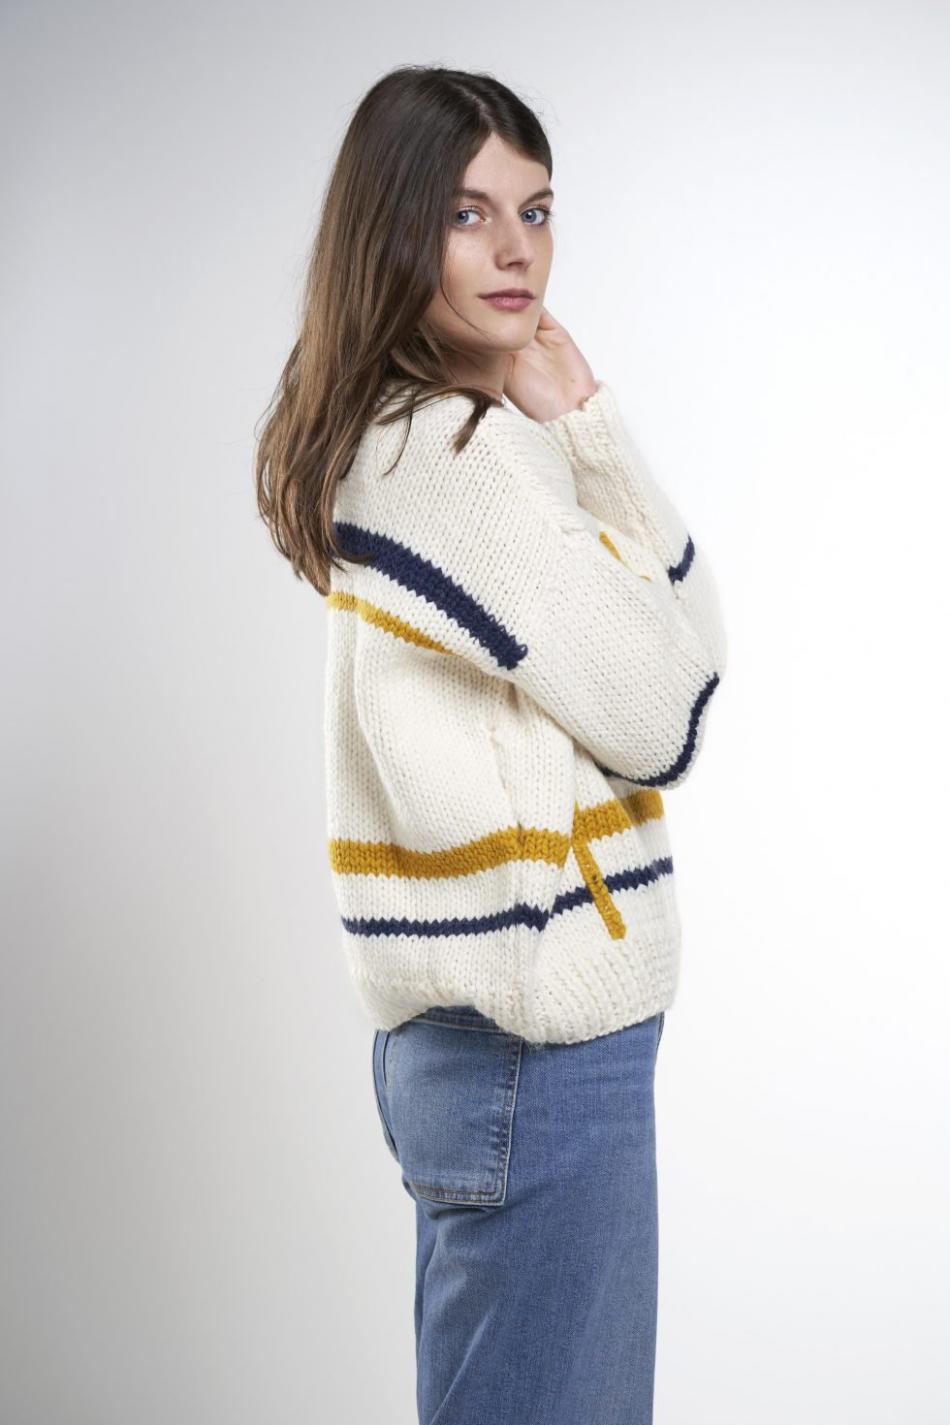 Stonehenge Pullover for Women, M, also adjustable, knit-a3-jpg